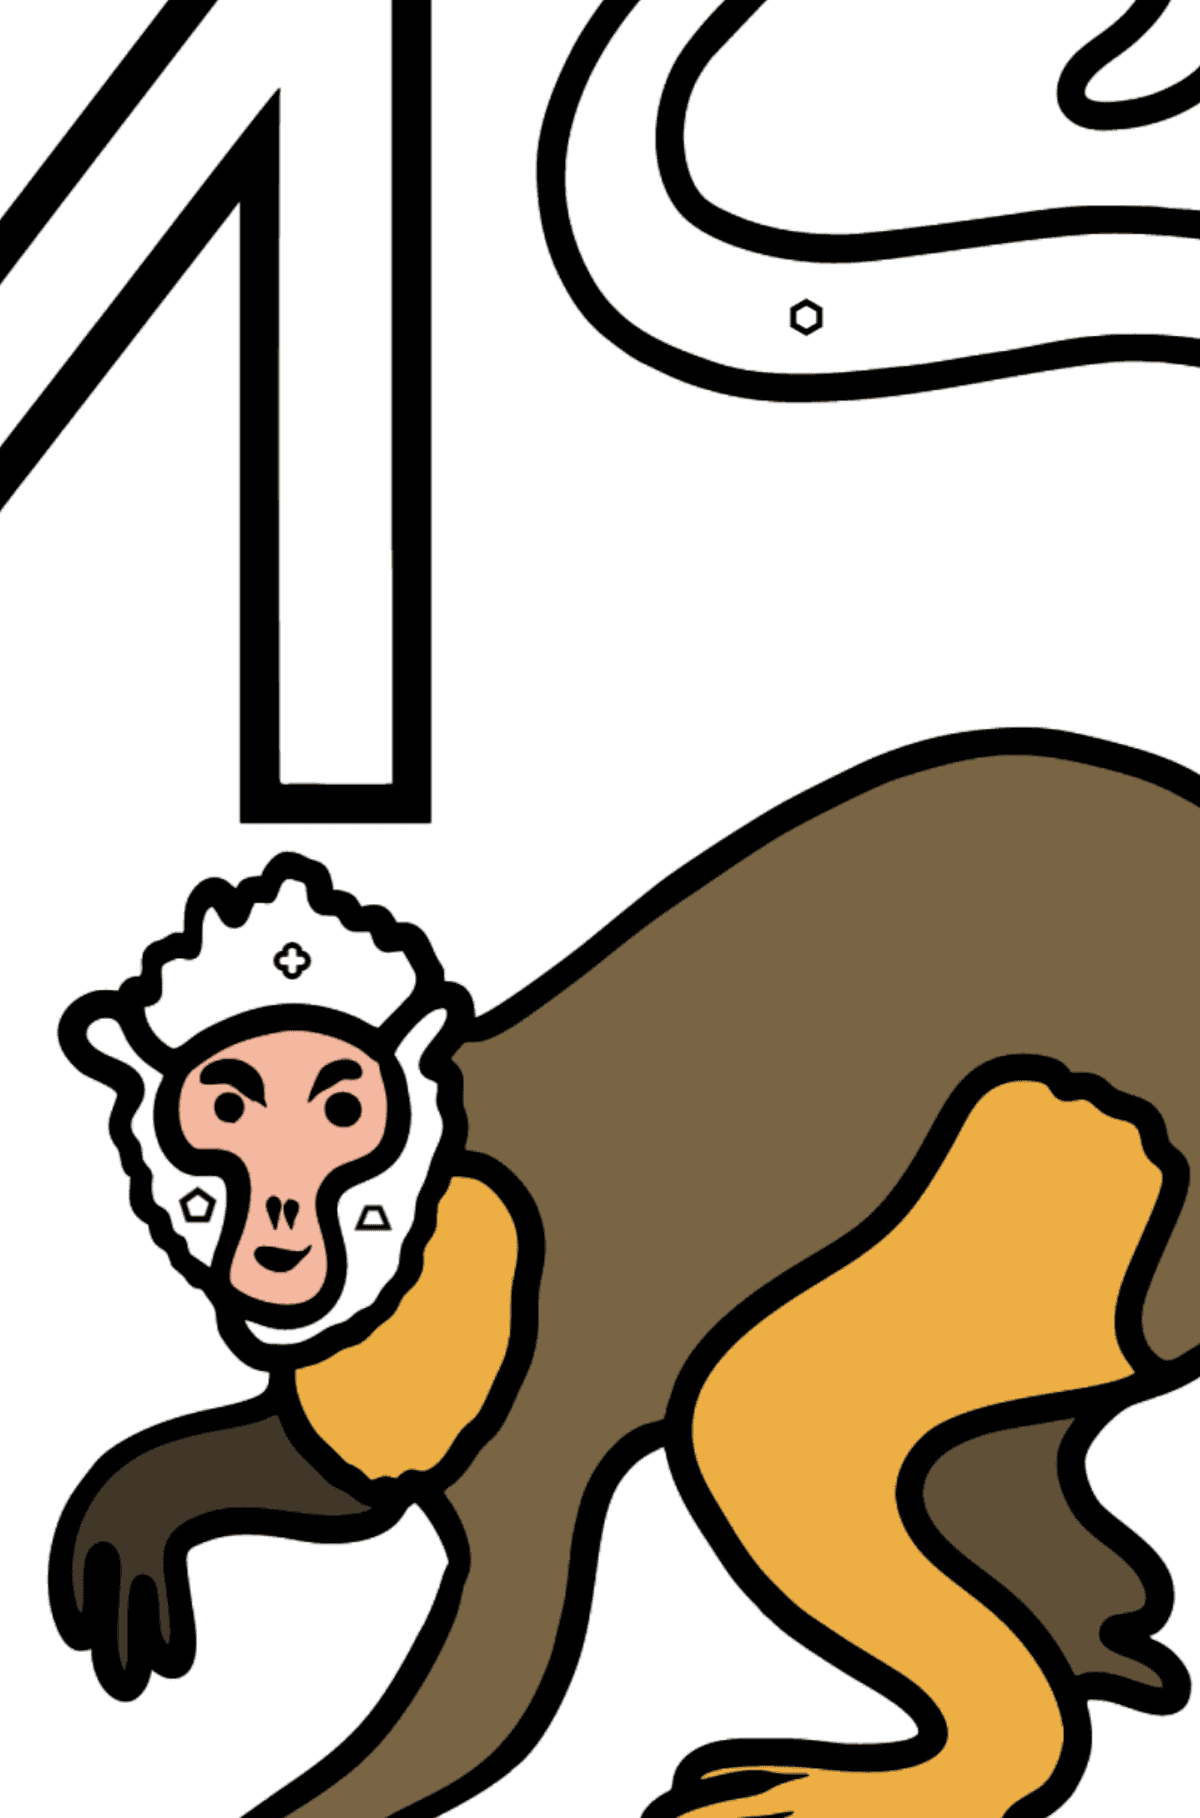 English Letter M coloring pages - A MONKEY - Coloring by Geometric Shapes for Kids